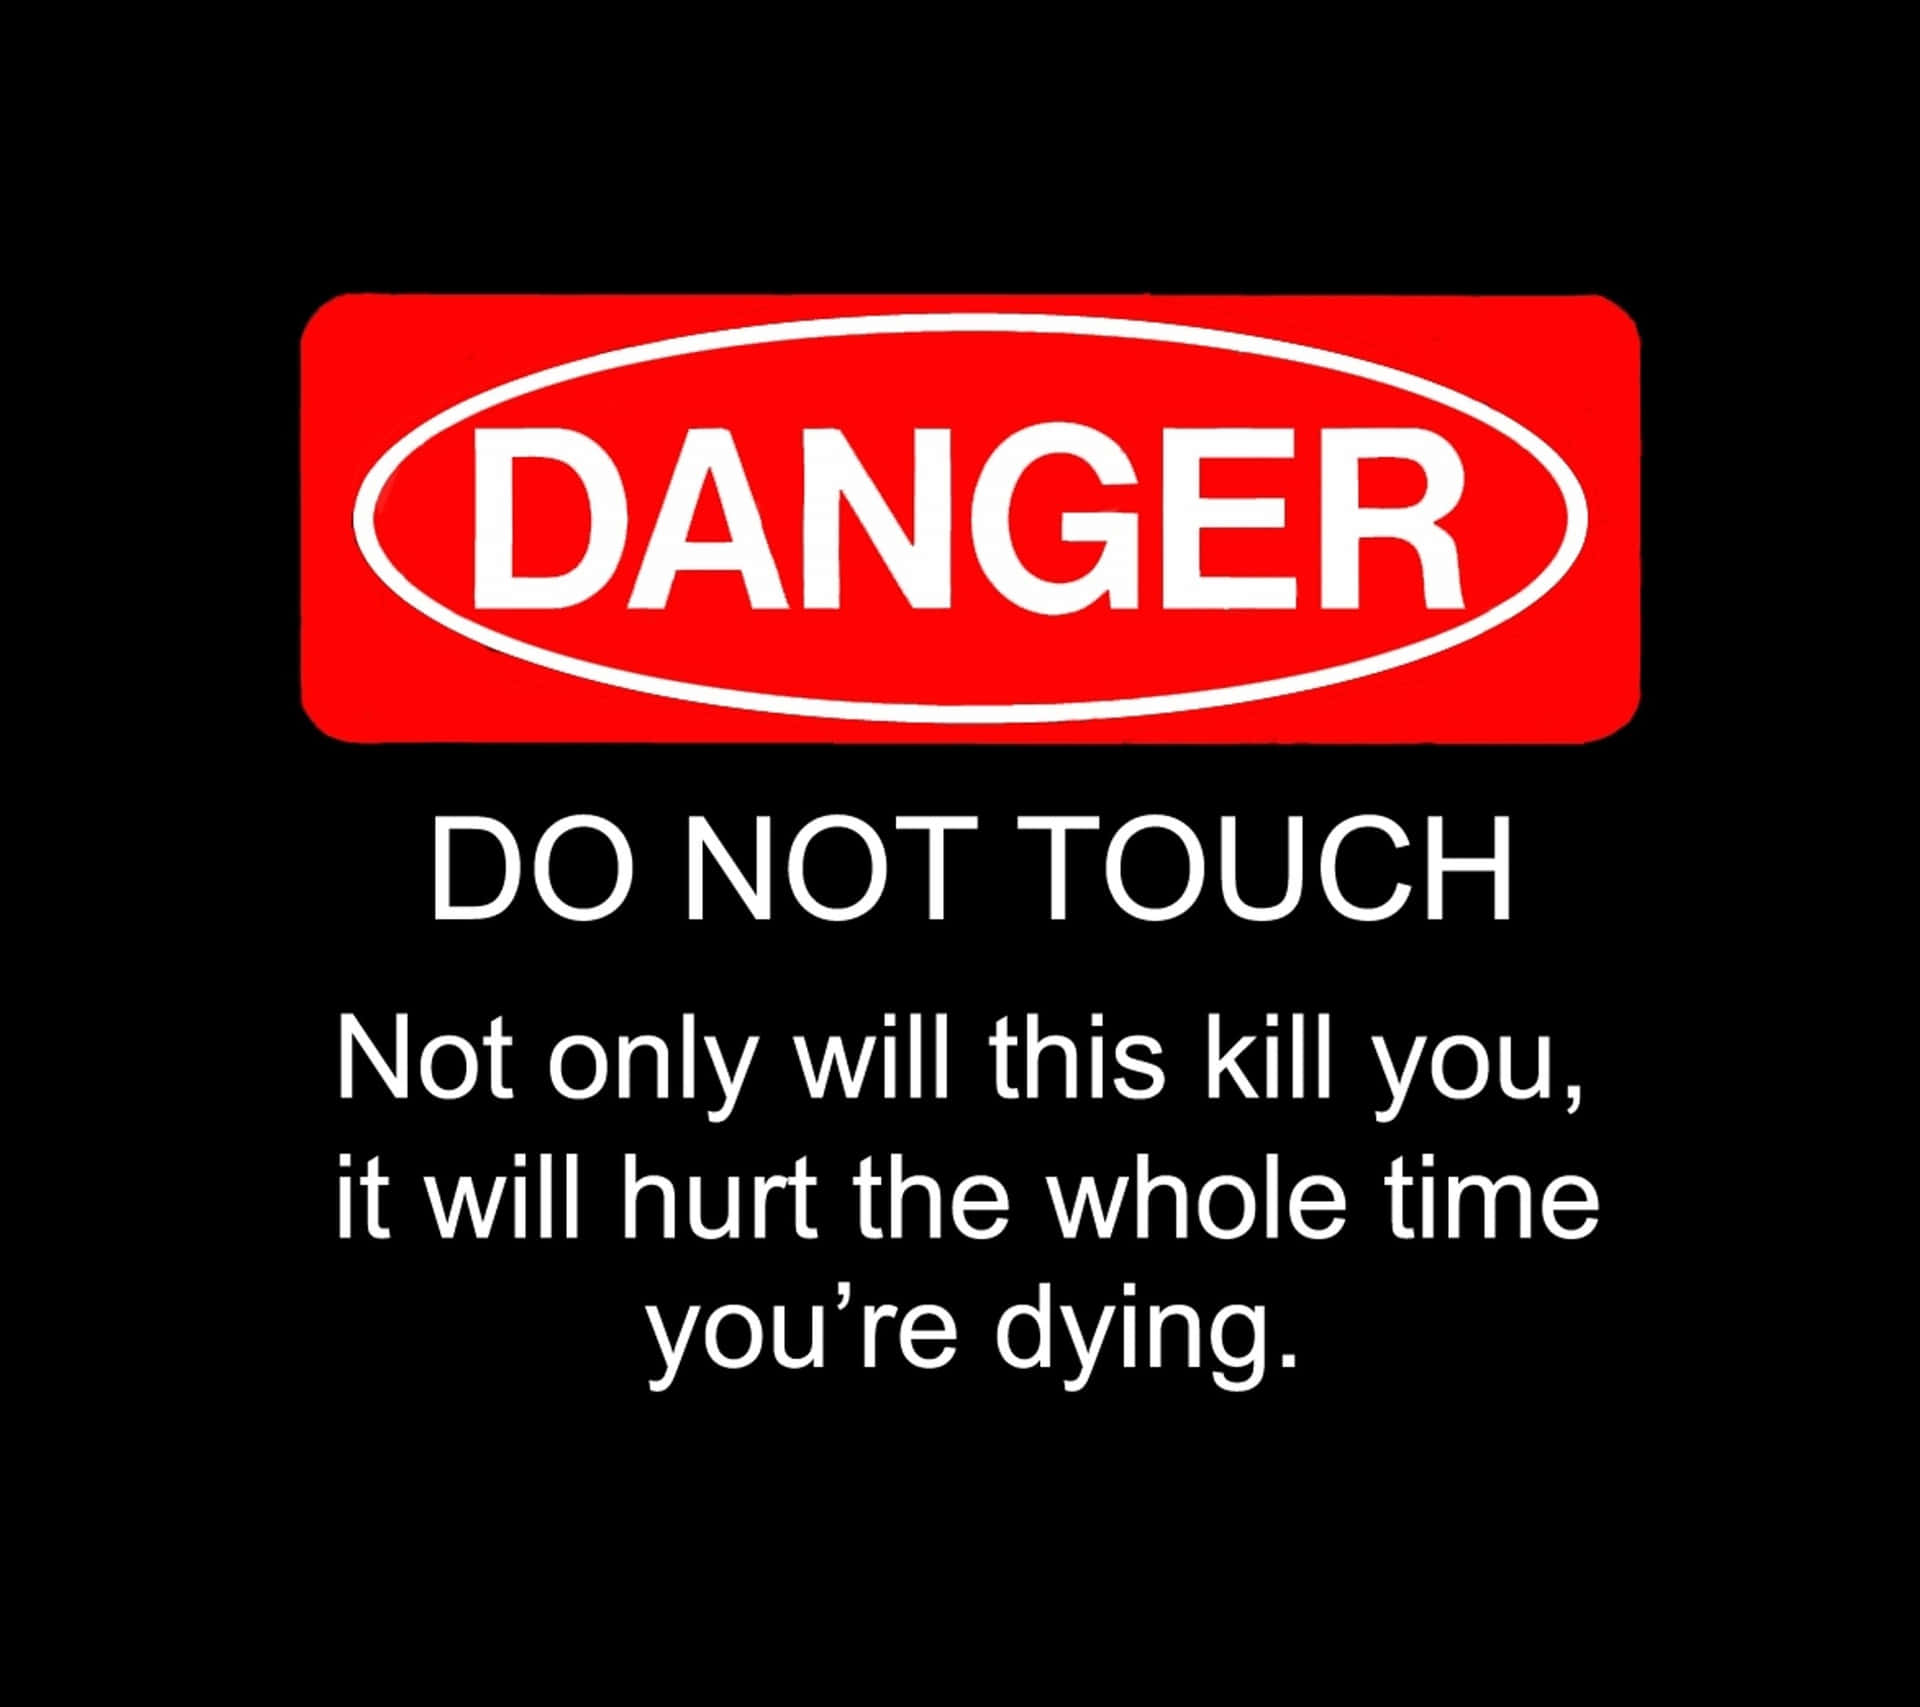 Danger Do Not Touch Only This Will Kill You Hurt The Whole You're Dying Background